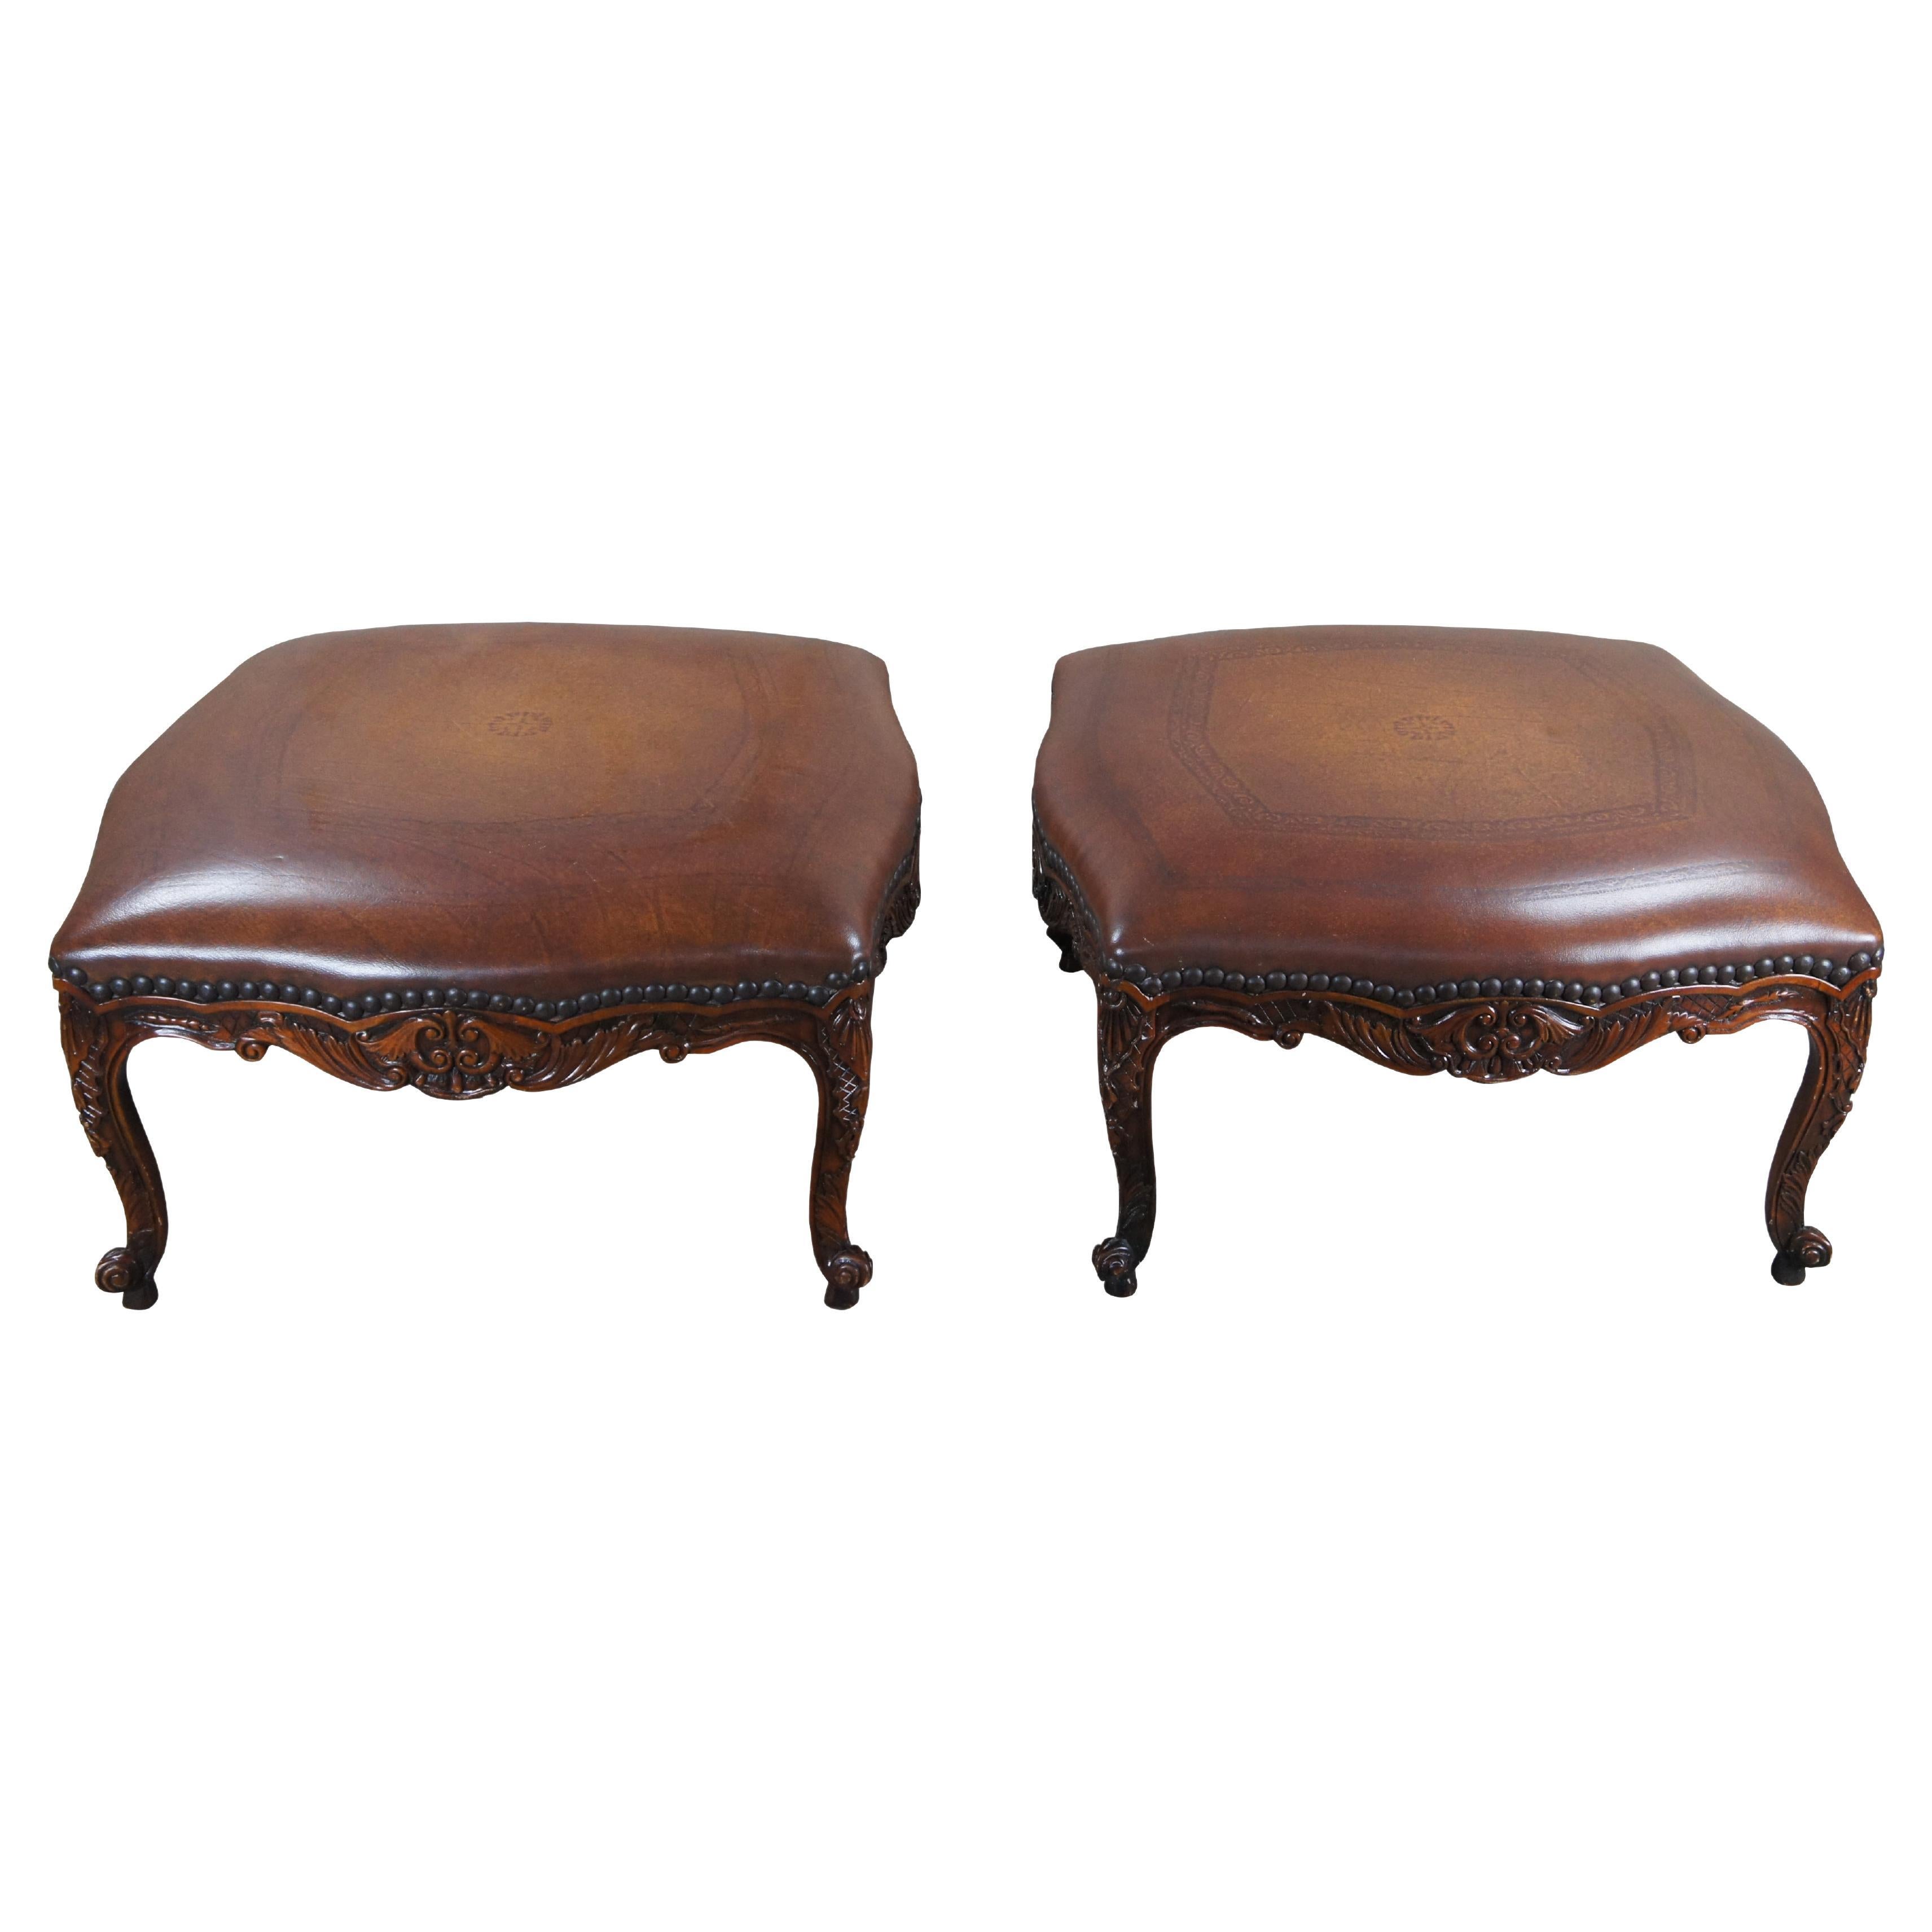 2 Vintage Theodore Alexander French Carved Mahogany Leather Ottomans Foot Stools For Sale